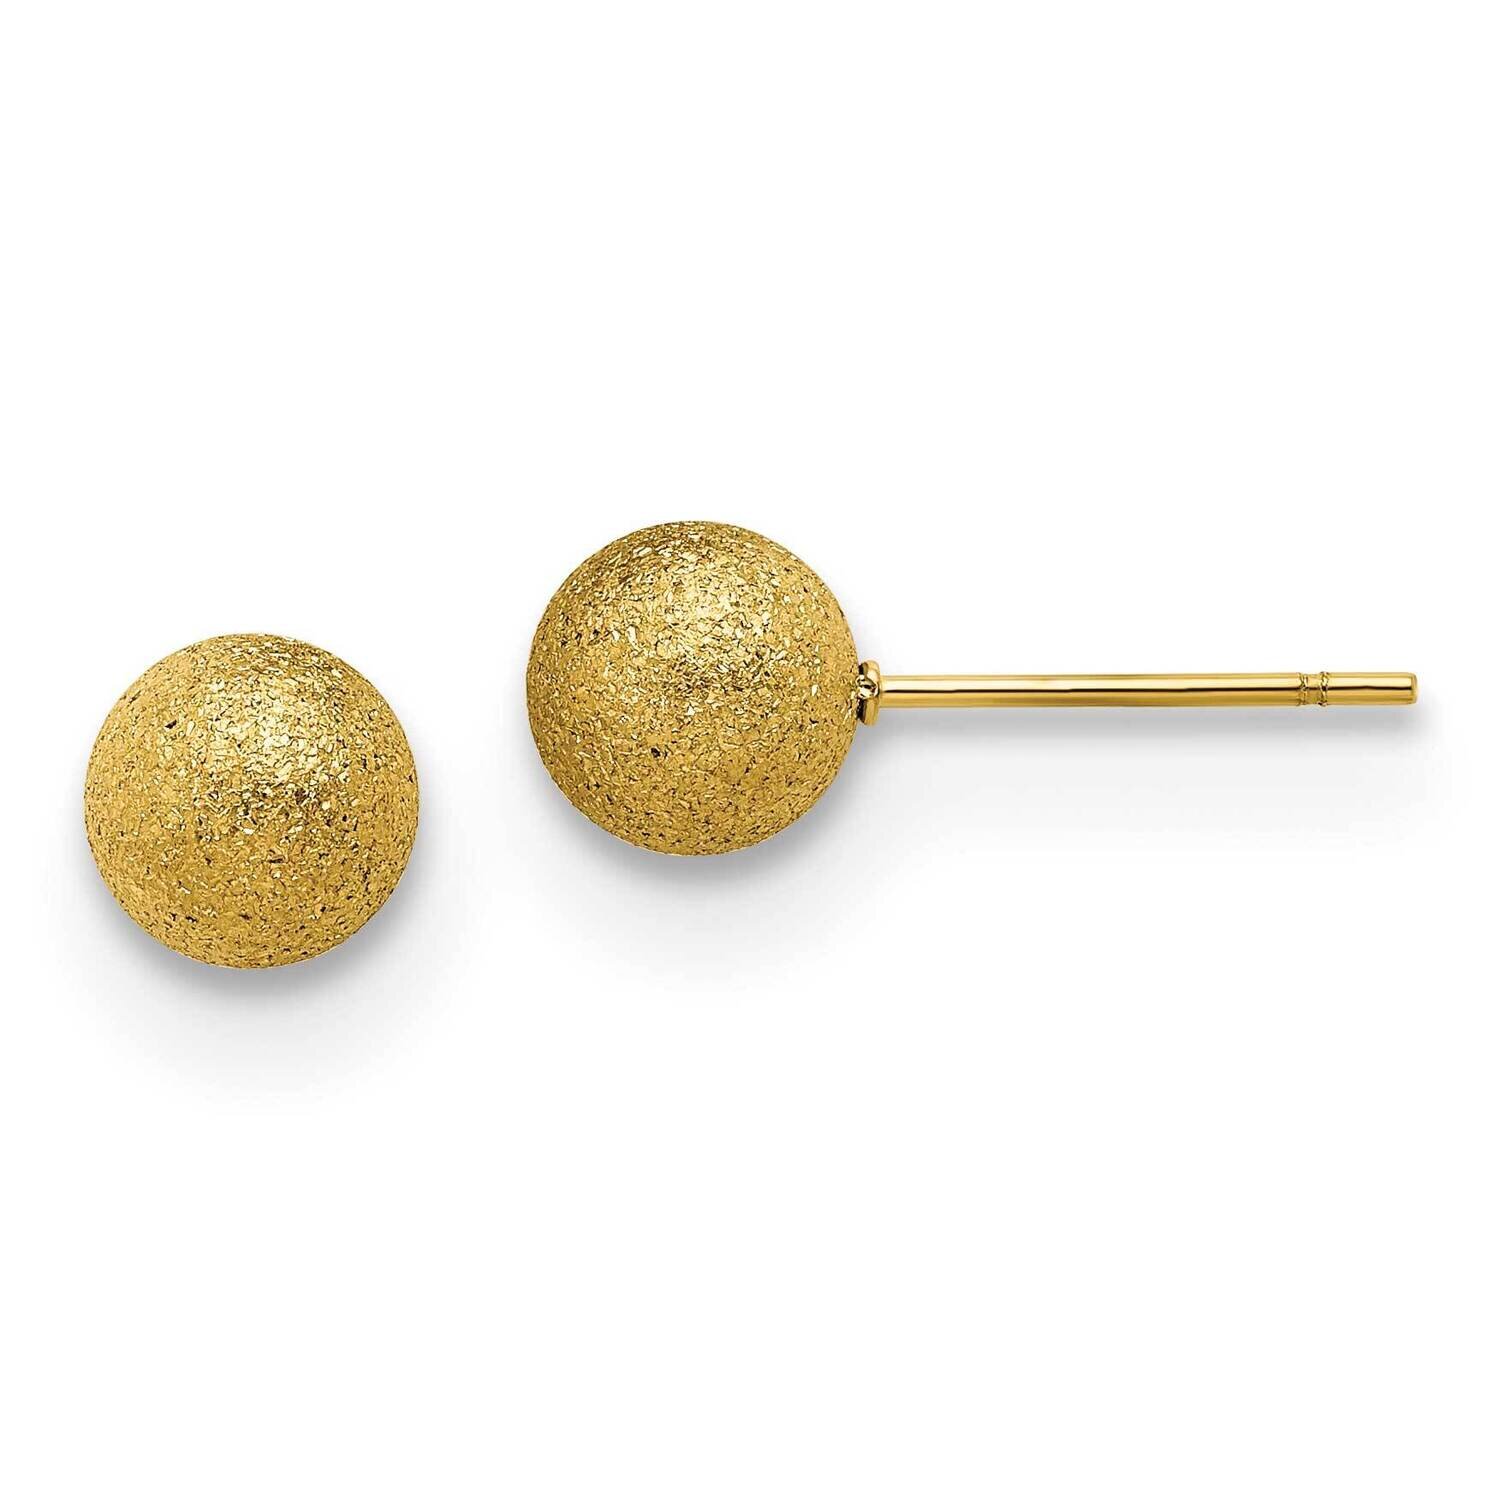 Laser Cut Yellow Ip-Plated 7mm Ball Post Earrings Stainless Steel Polished SRE1434